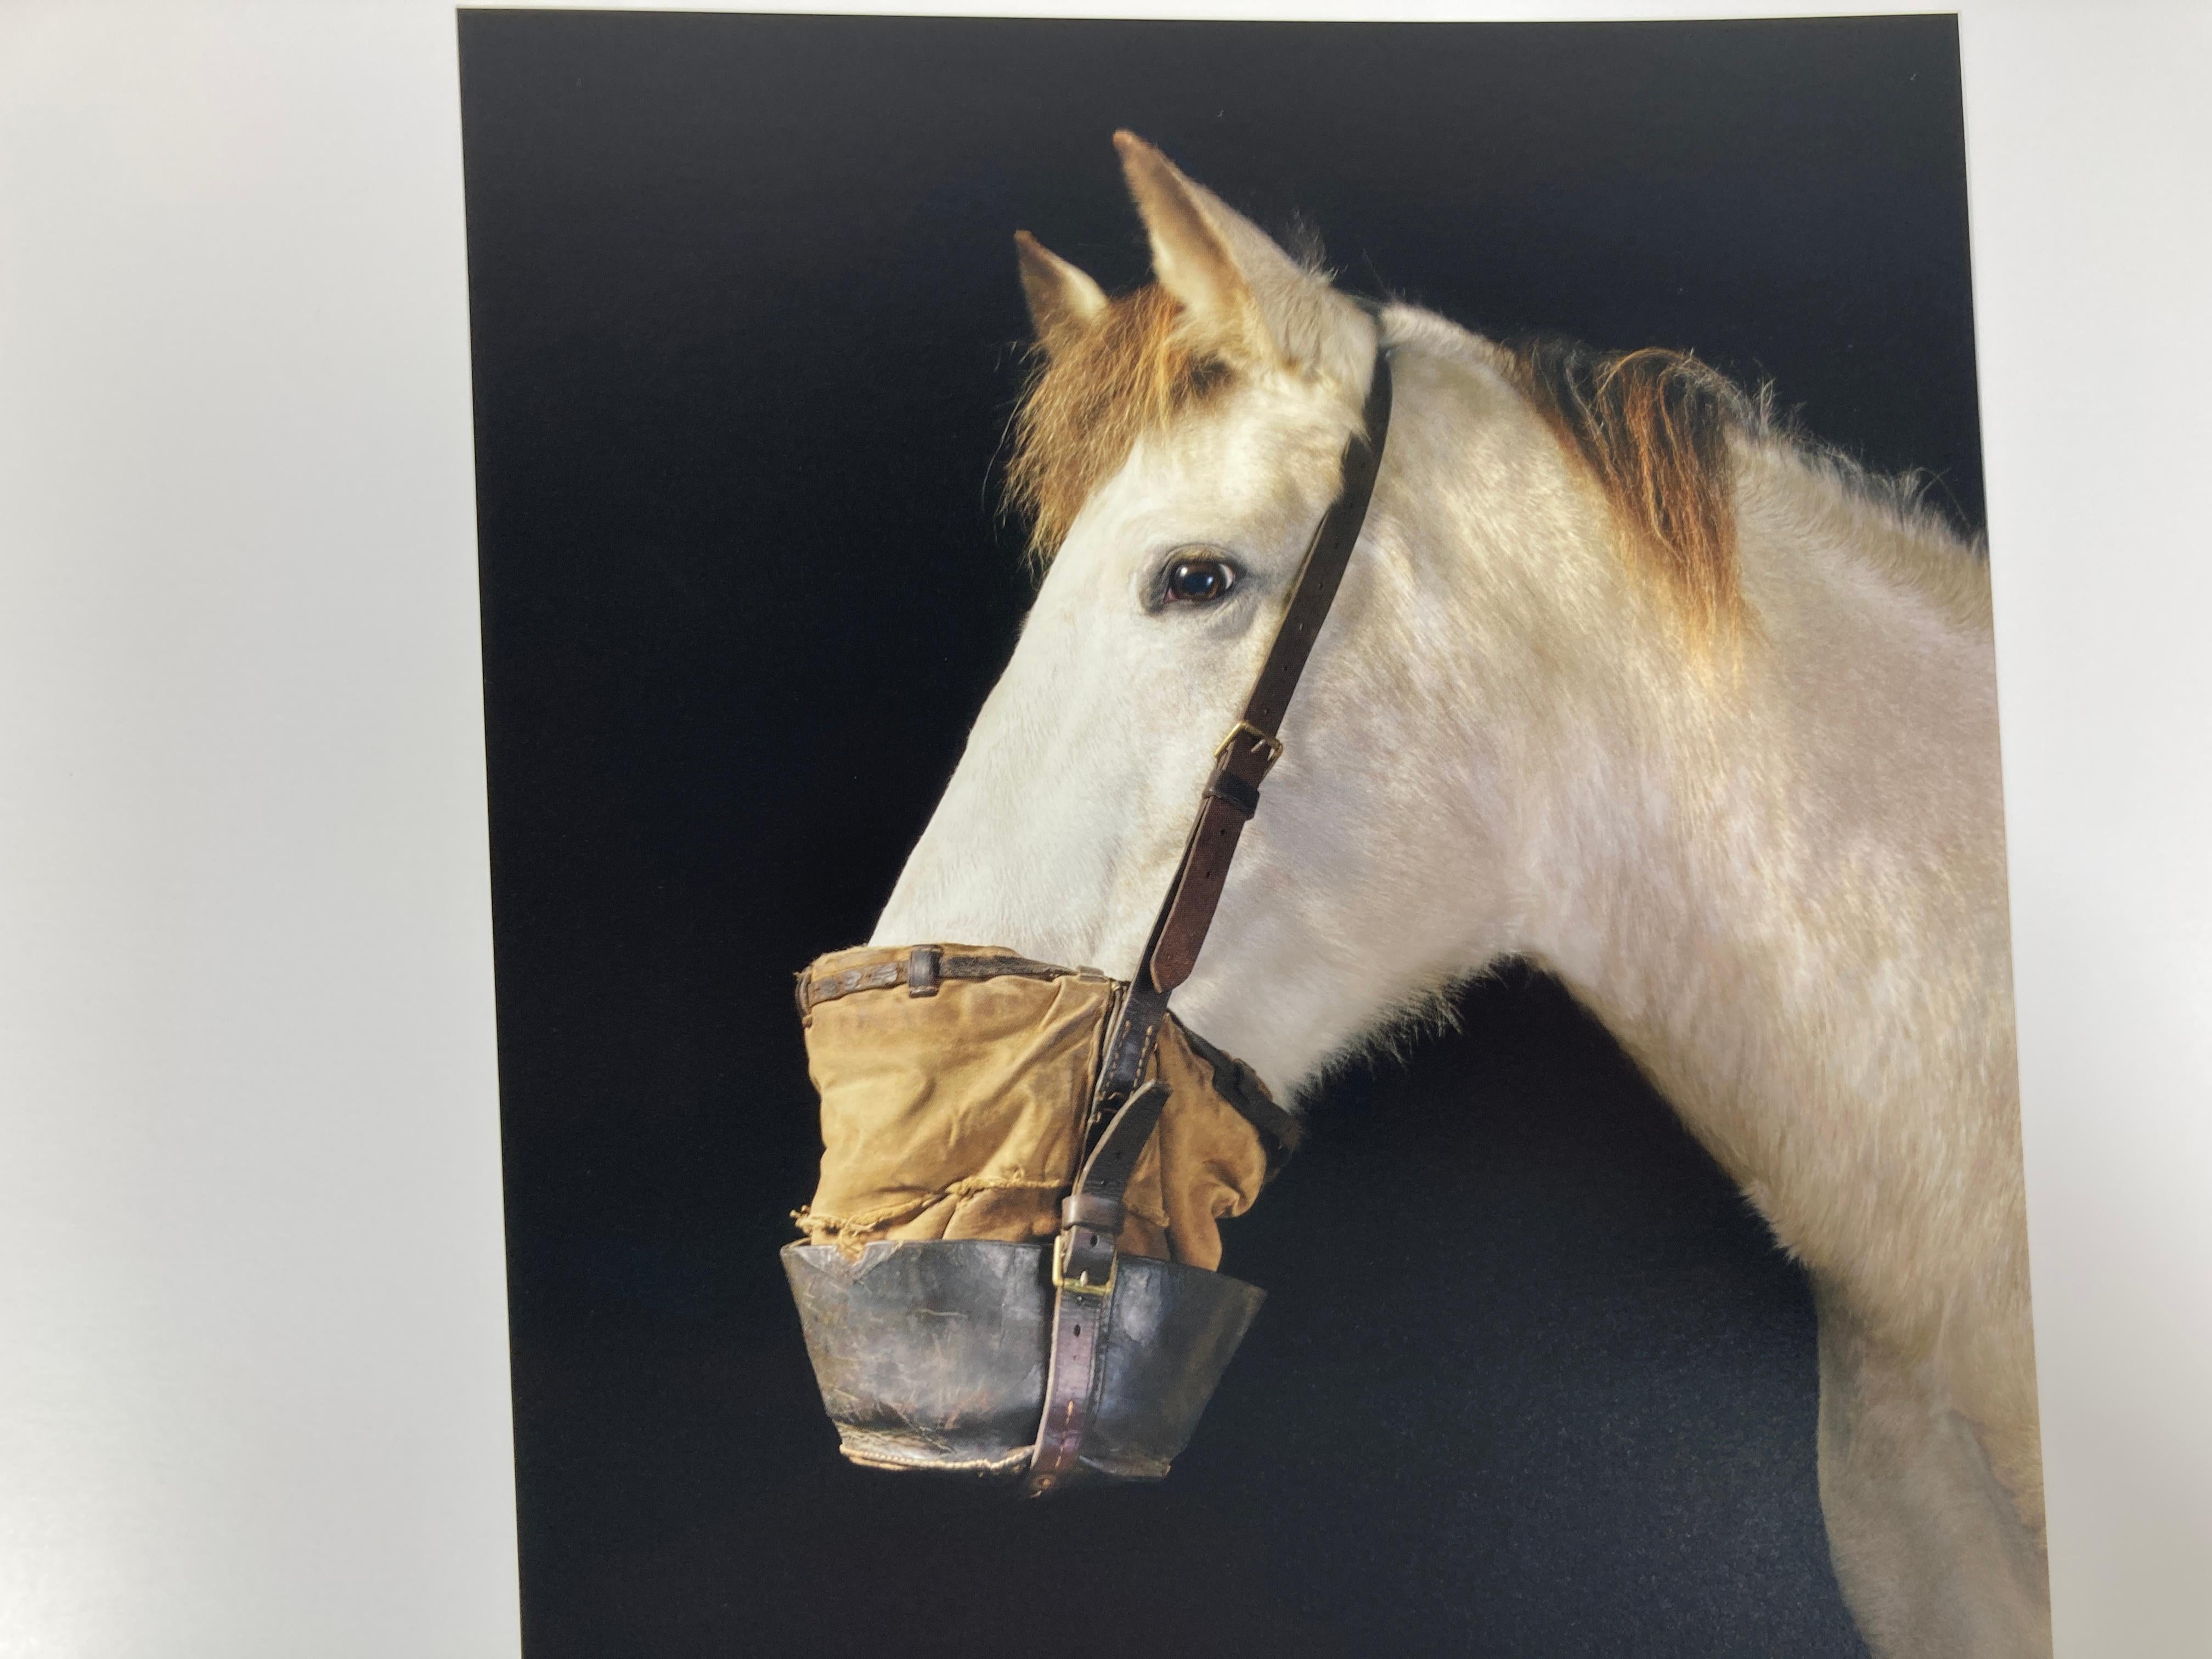 Equus by Tim Flach Large Hardcover Large Table Book 1st Edition 5